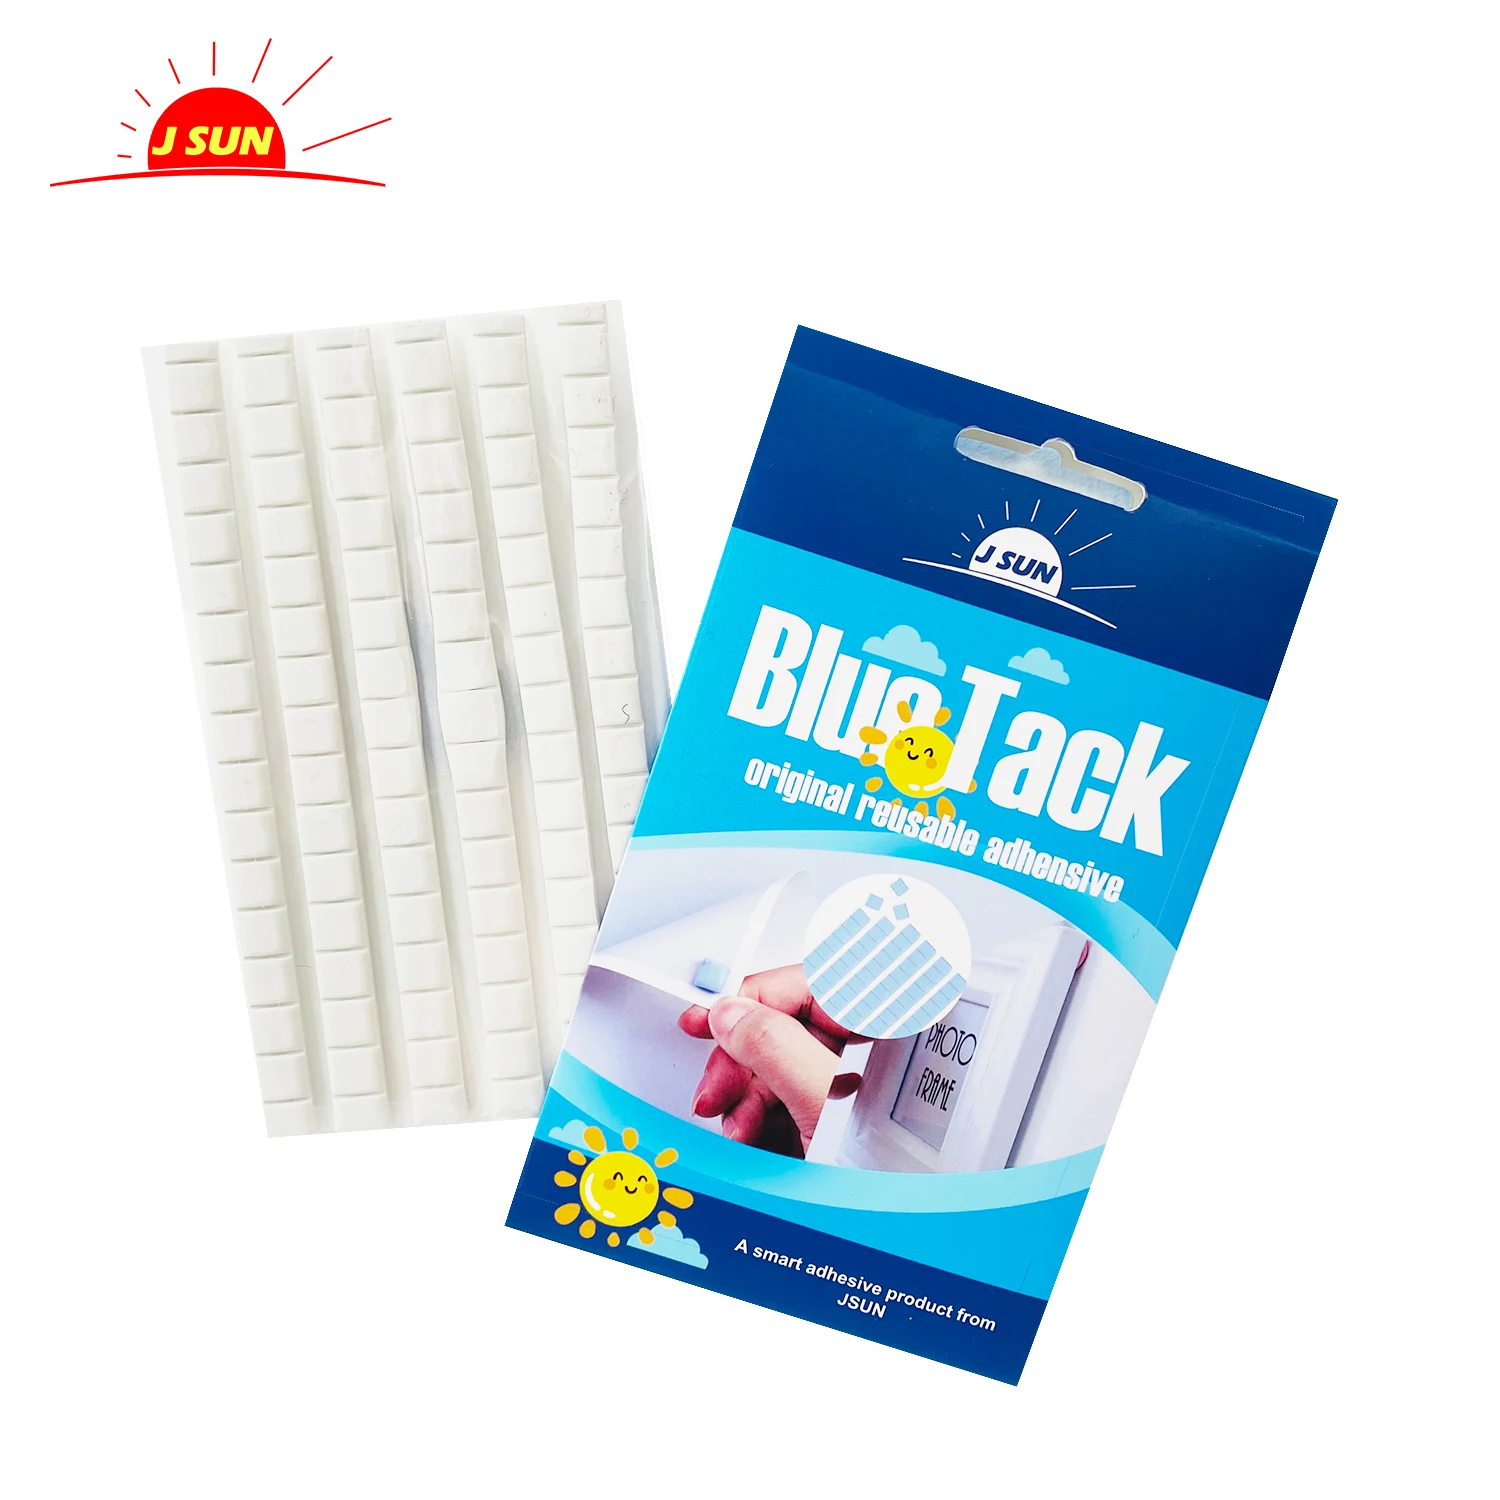 High Quality Non-Toxic Removable and Reusable Smart Adhesives Sticky Power  Blu Poster Tack - China Power Tack, Fix It Tack